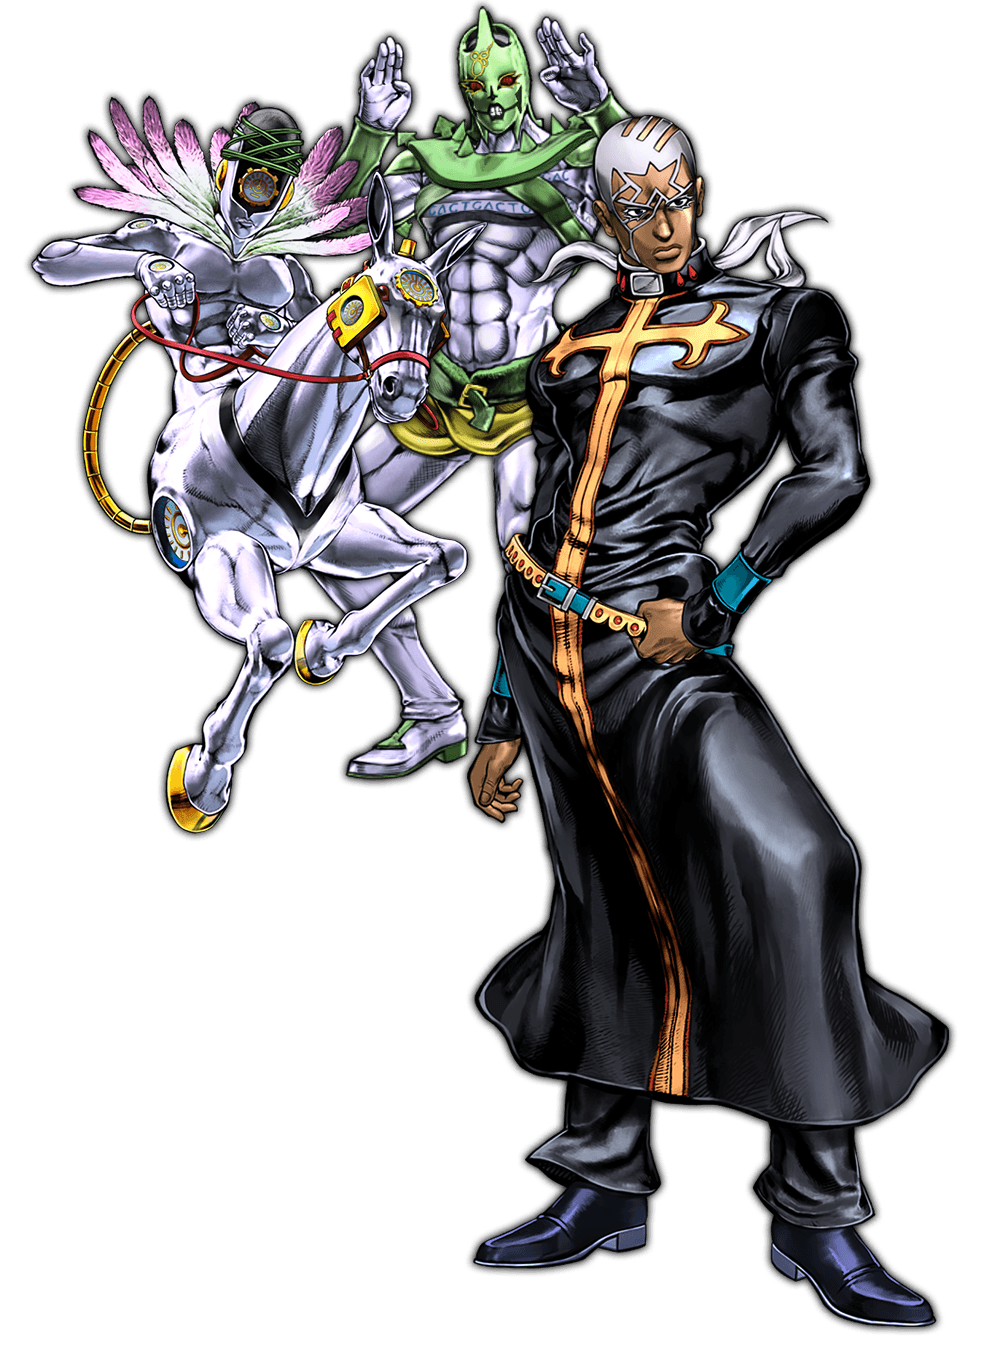 Weather Report and Final Pucci Join JoJo AllStar Battle R on December 1